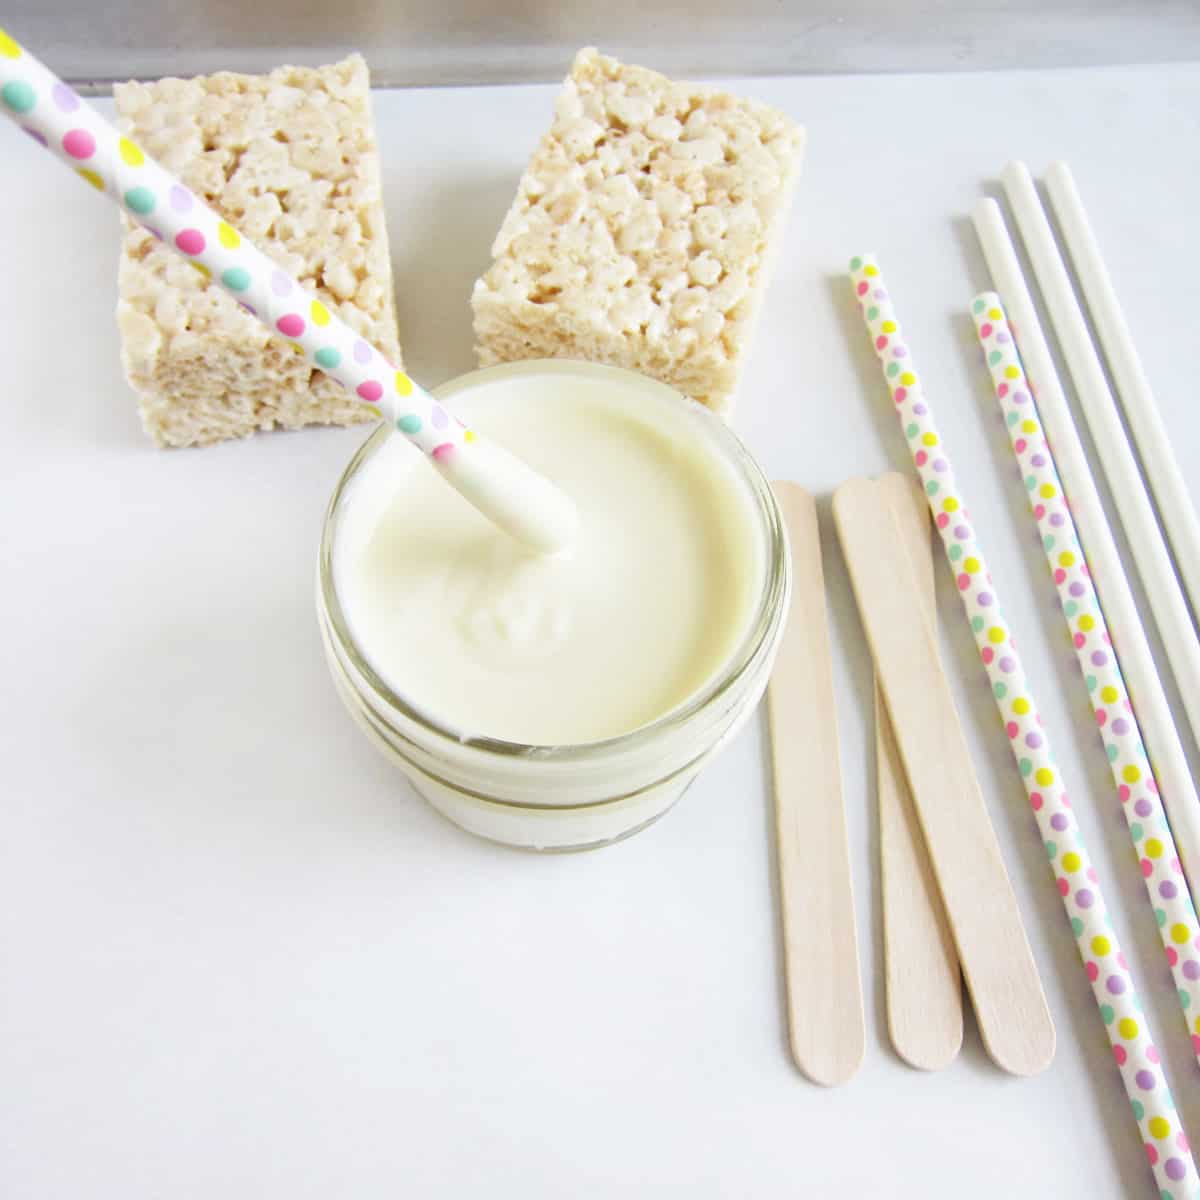 Dipping a polka dot paper straw into a bowl of white chocolate on a tray with rice krispie treats, popsicle sticks, and lollipop sticks.